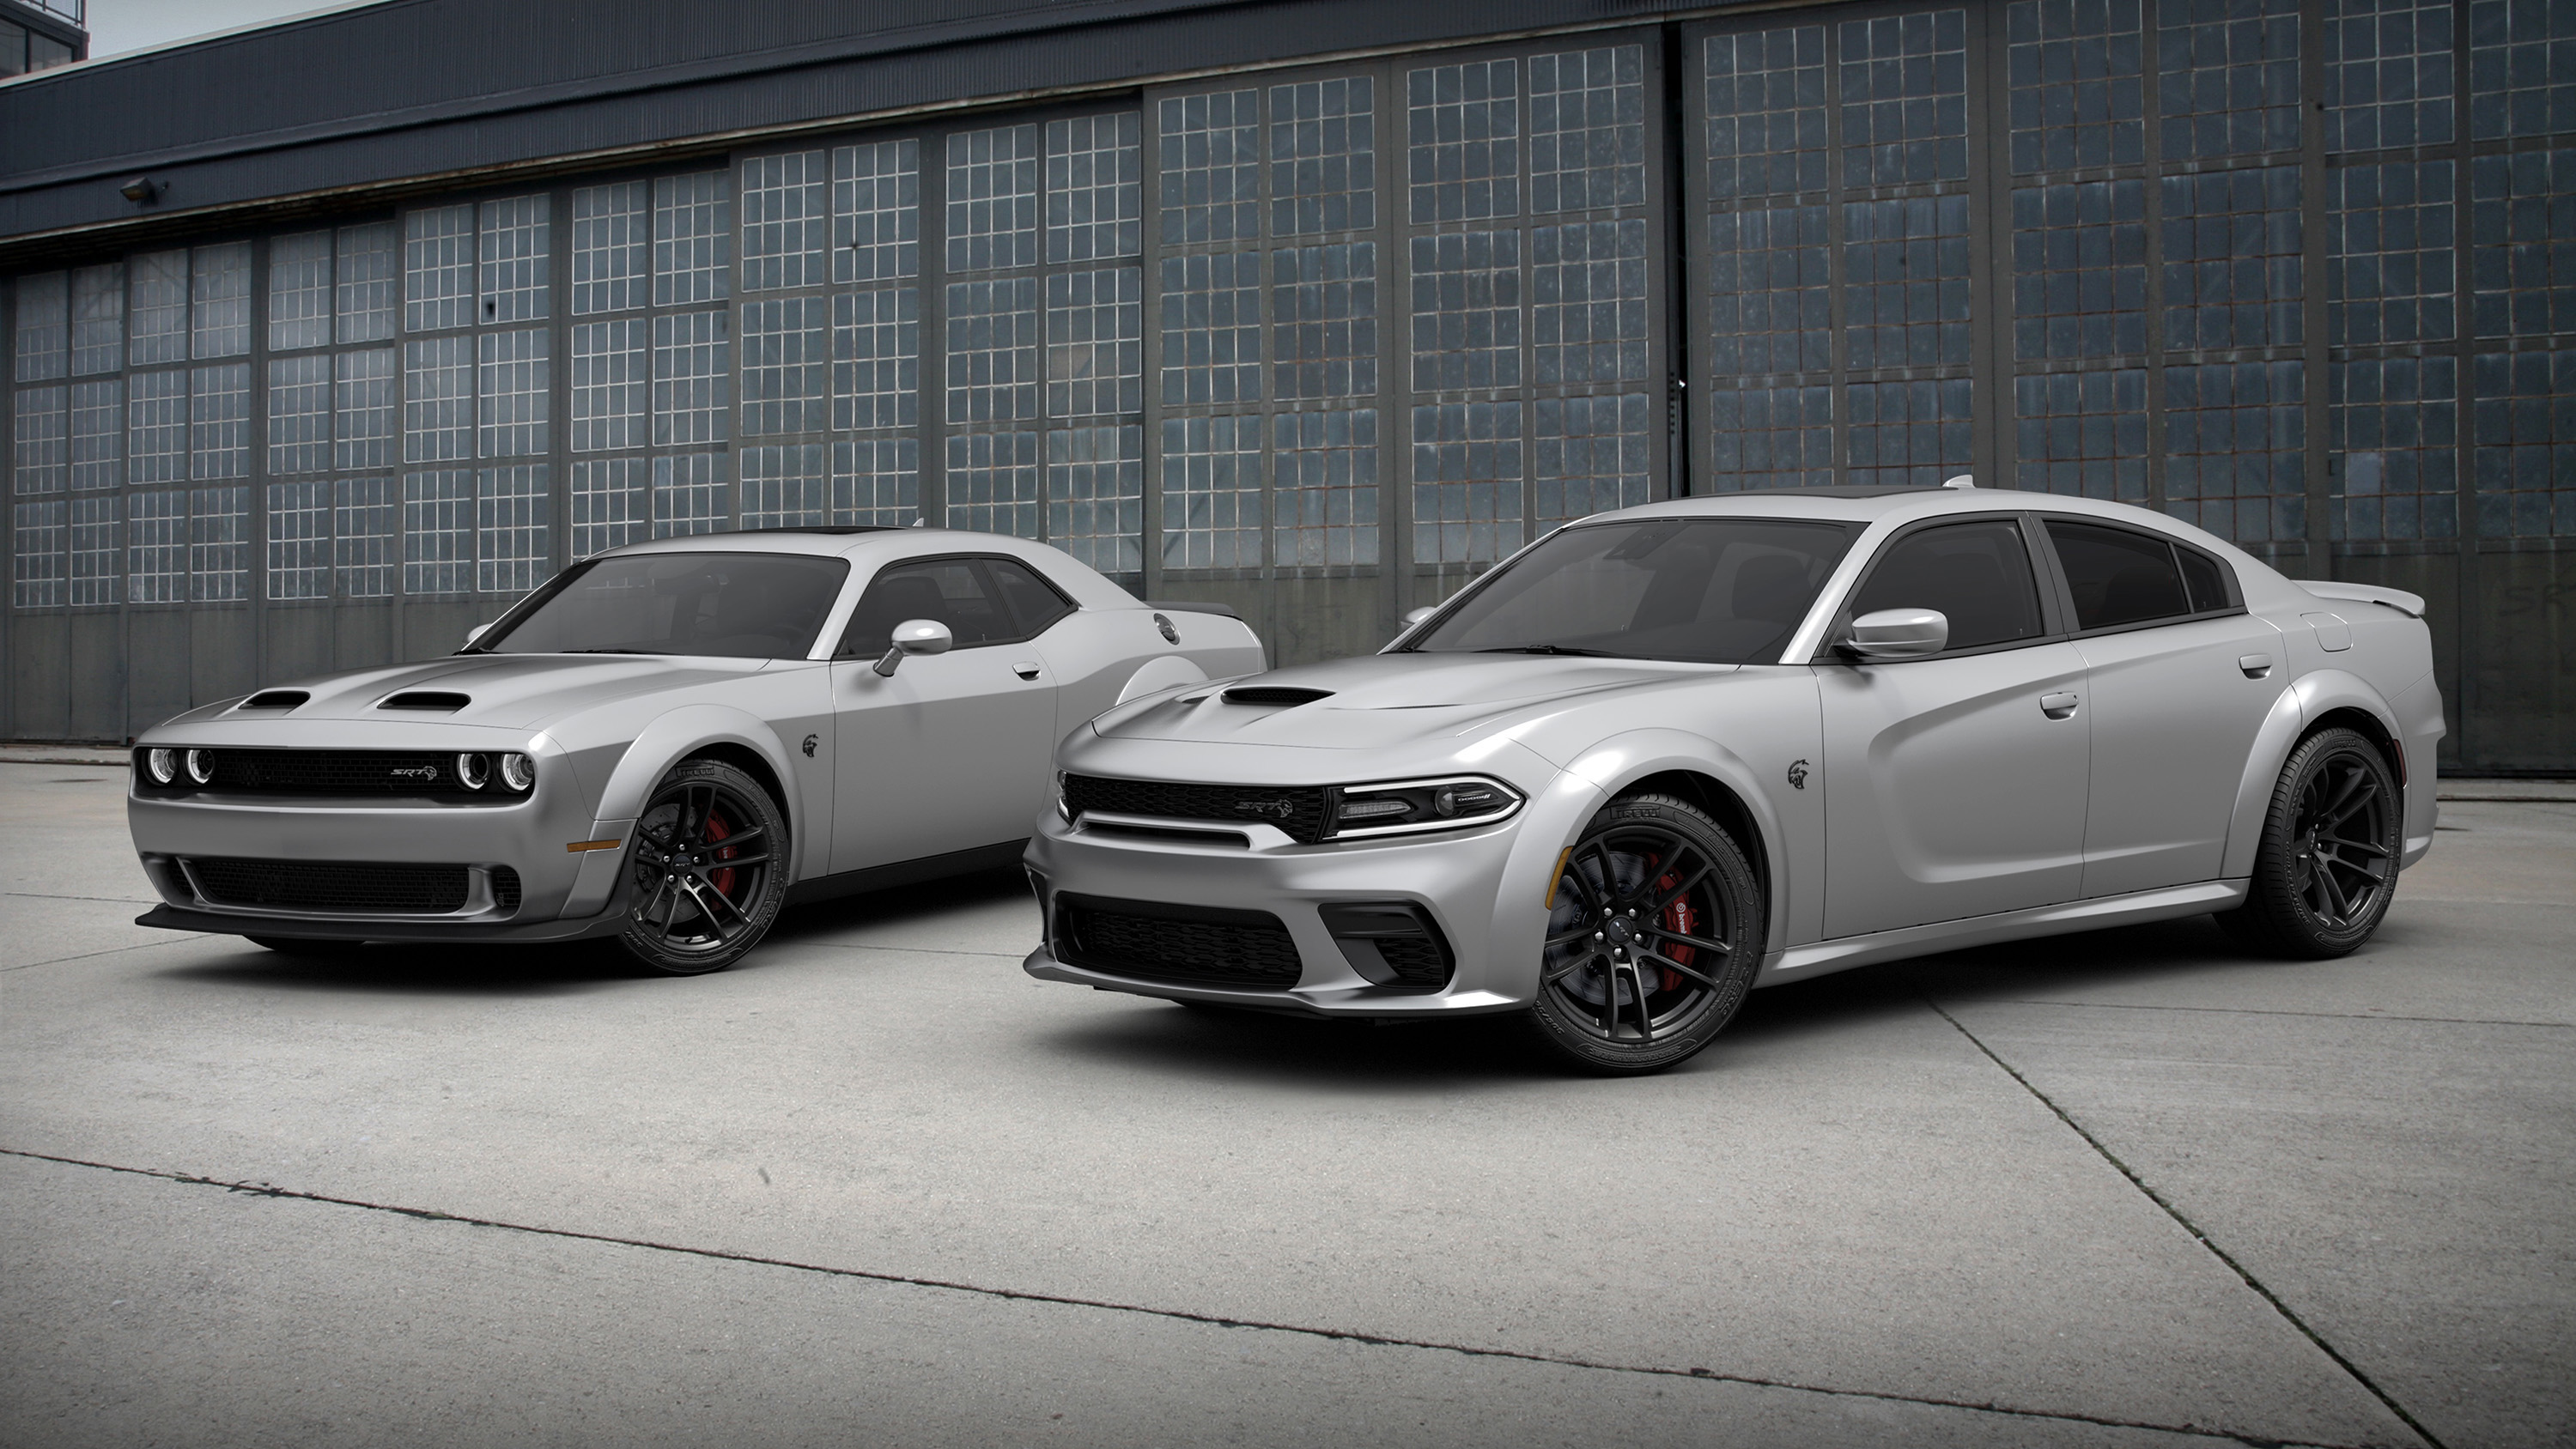 2020 Dodge Challenger 50th Anniversary Commemorative Edition puts on a